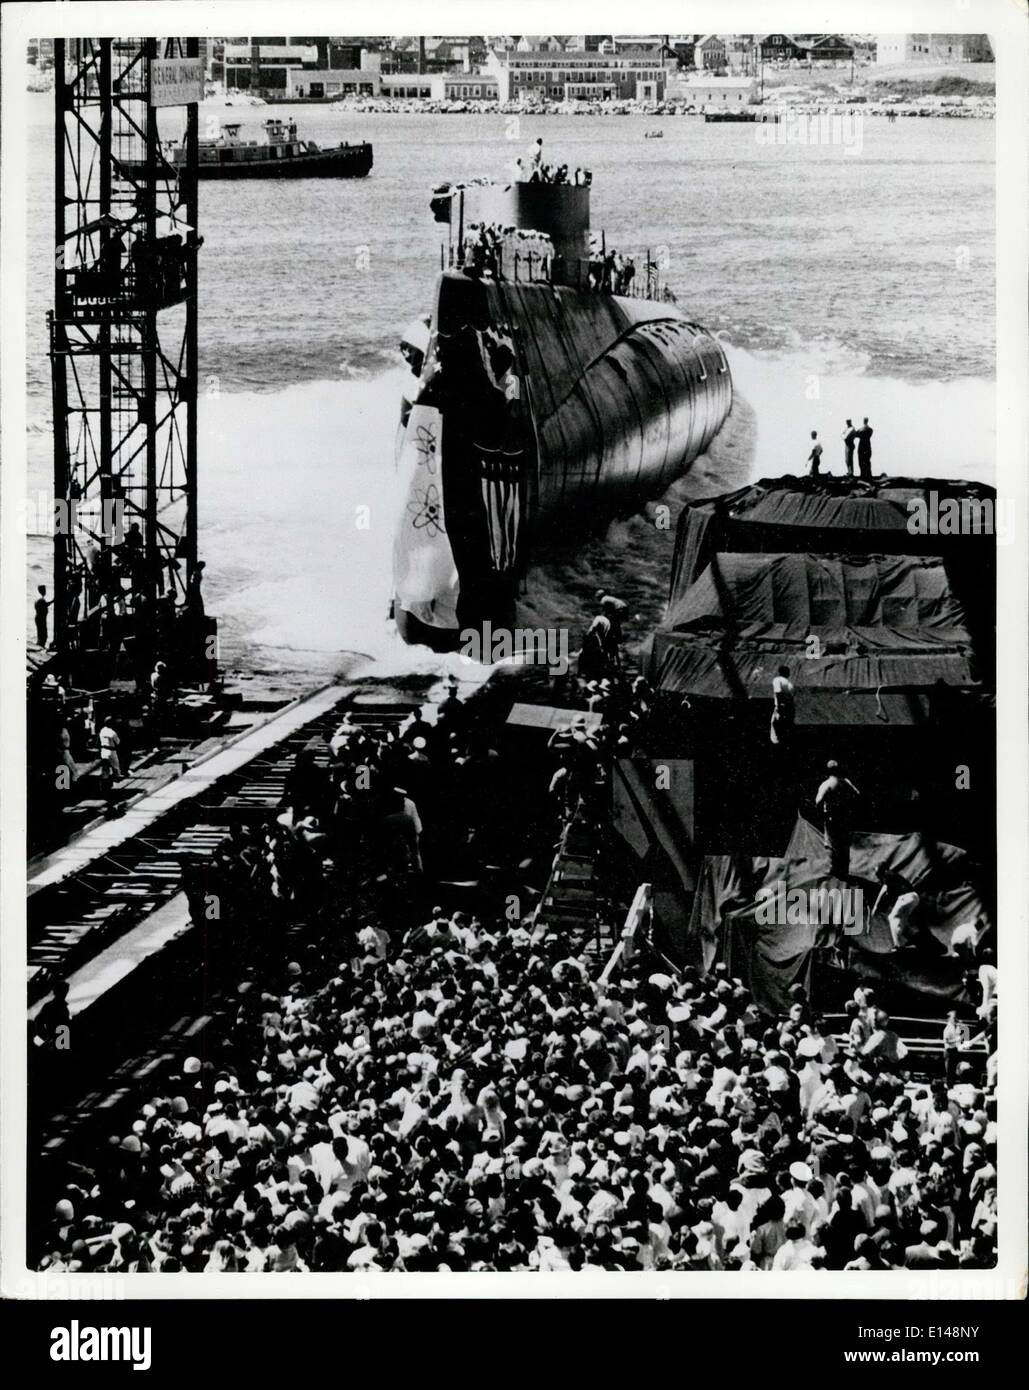 Apr. 17, 2012 - Going, Going, Gone: The USS Triton (SSR(N)-586,), Largest United States Submarine, slides down the ways into the thames river at Groton, connecticut, during launching ceremonies August 19,1958. The Triton is powered by two Atomic REactors, It Measures 447 Feet in Length and has a 5,900 ton Displacement. Stock Photo